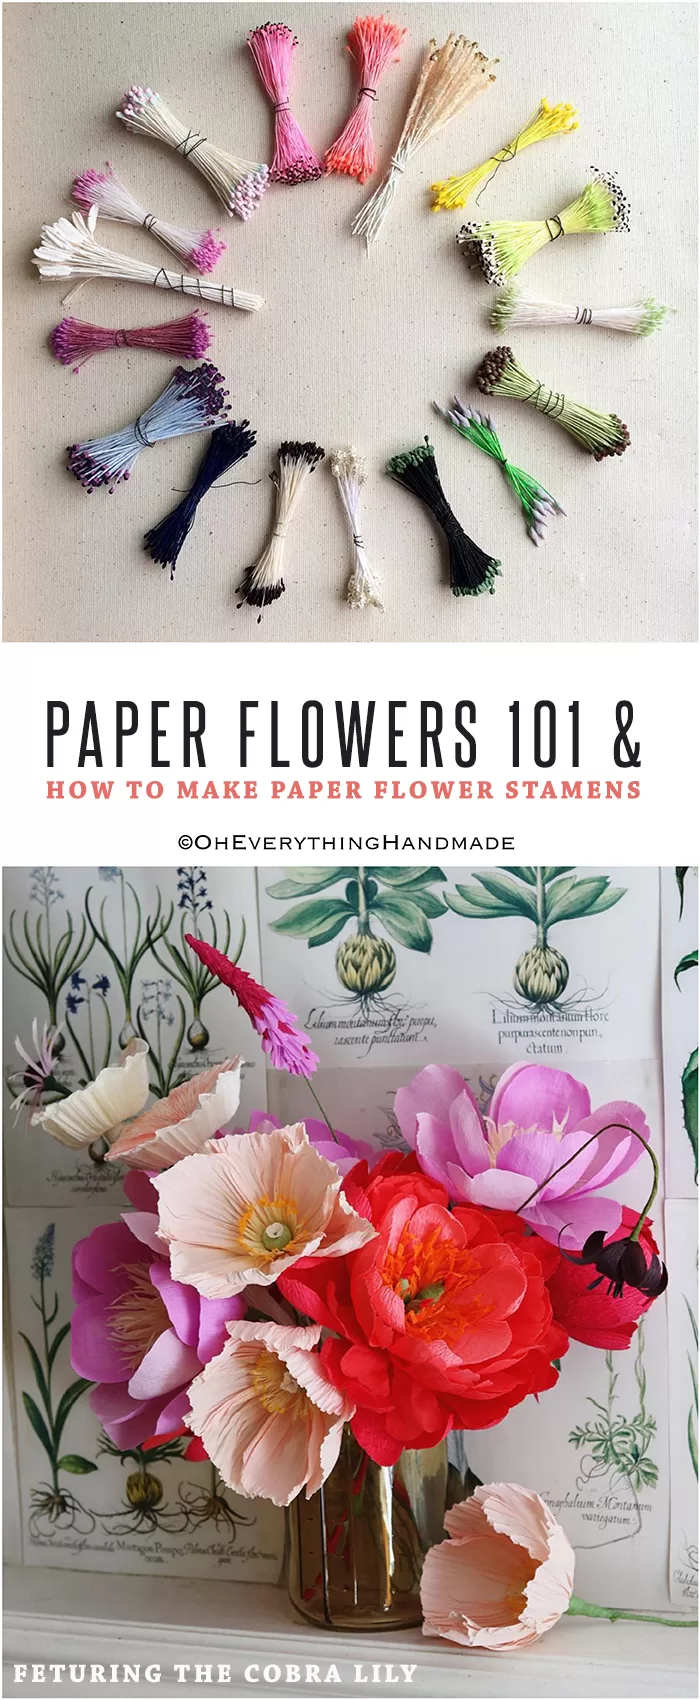 paper-flowers-101-how-to-make-flower-stamens-thecobralily-feature-pin-it